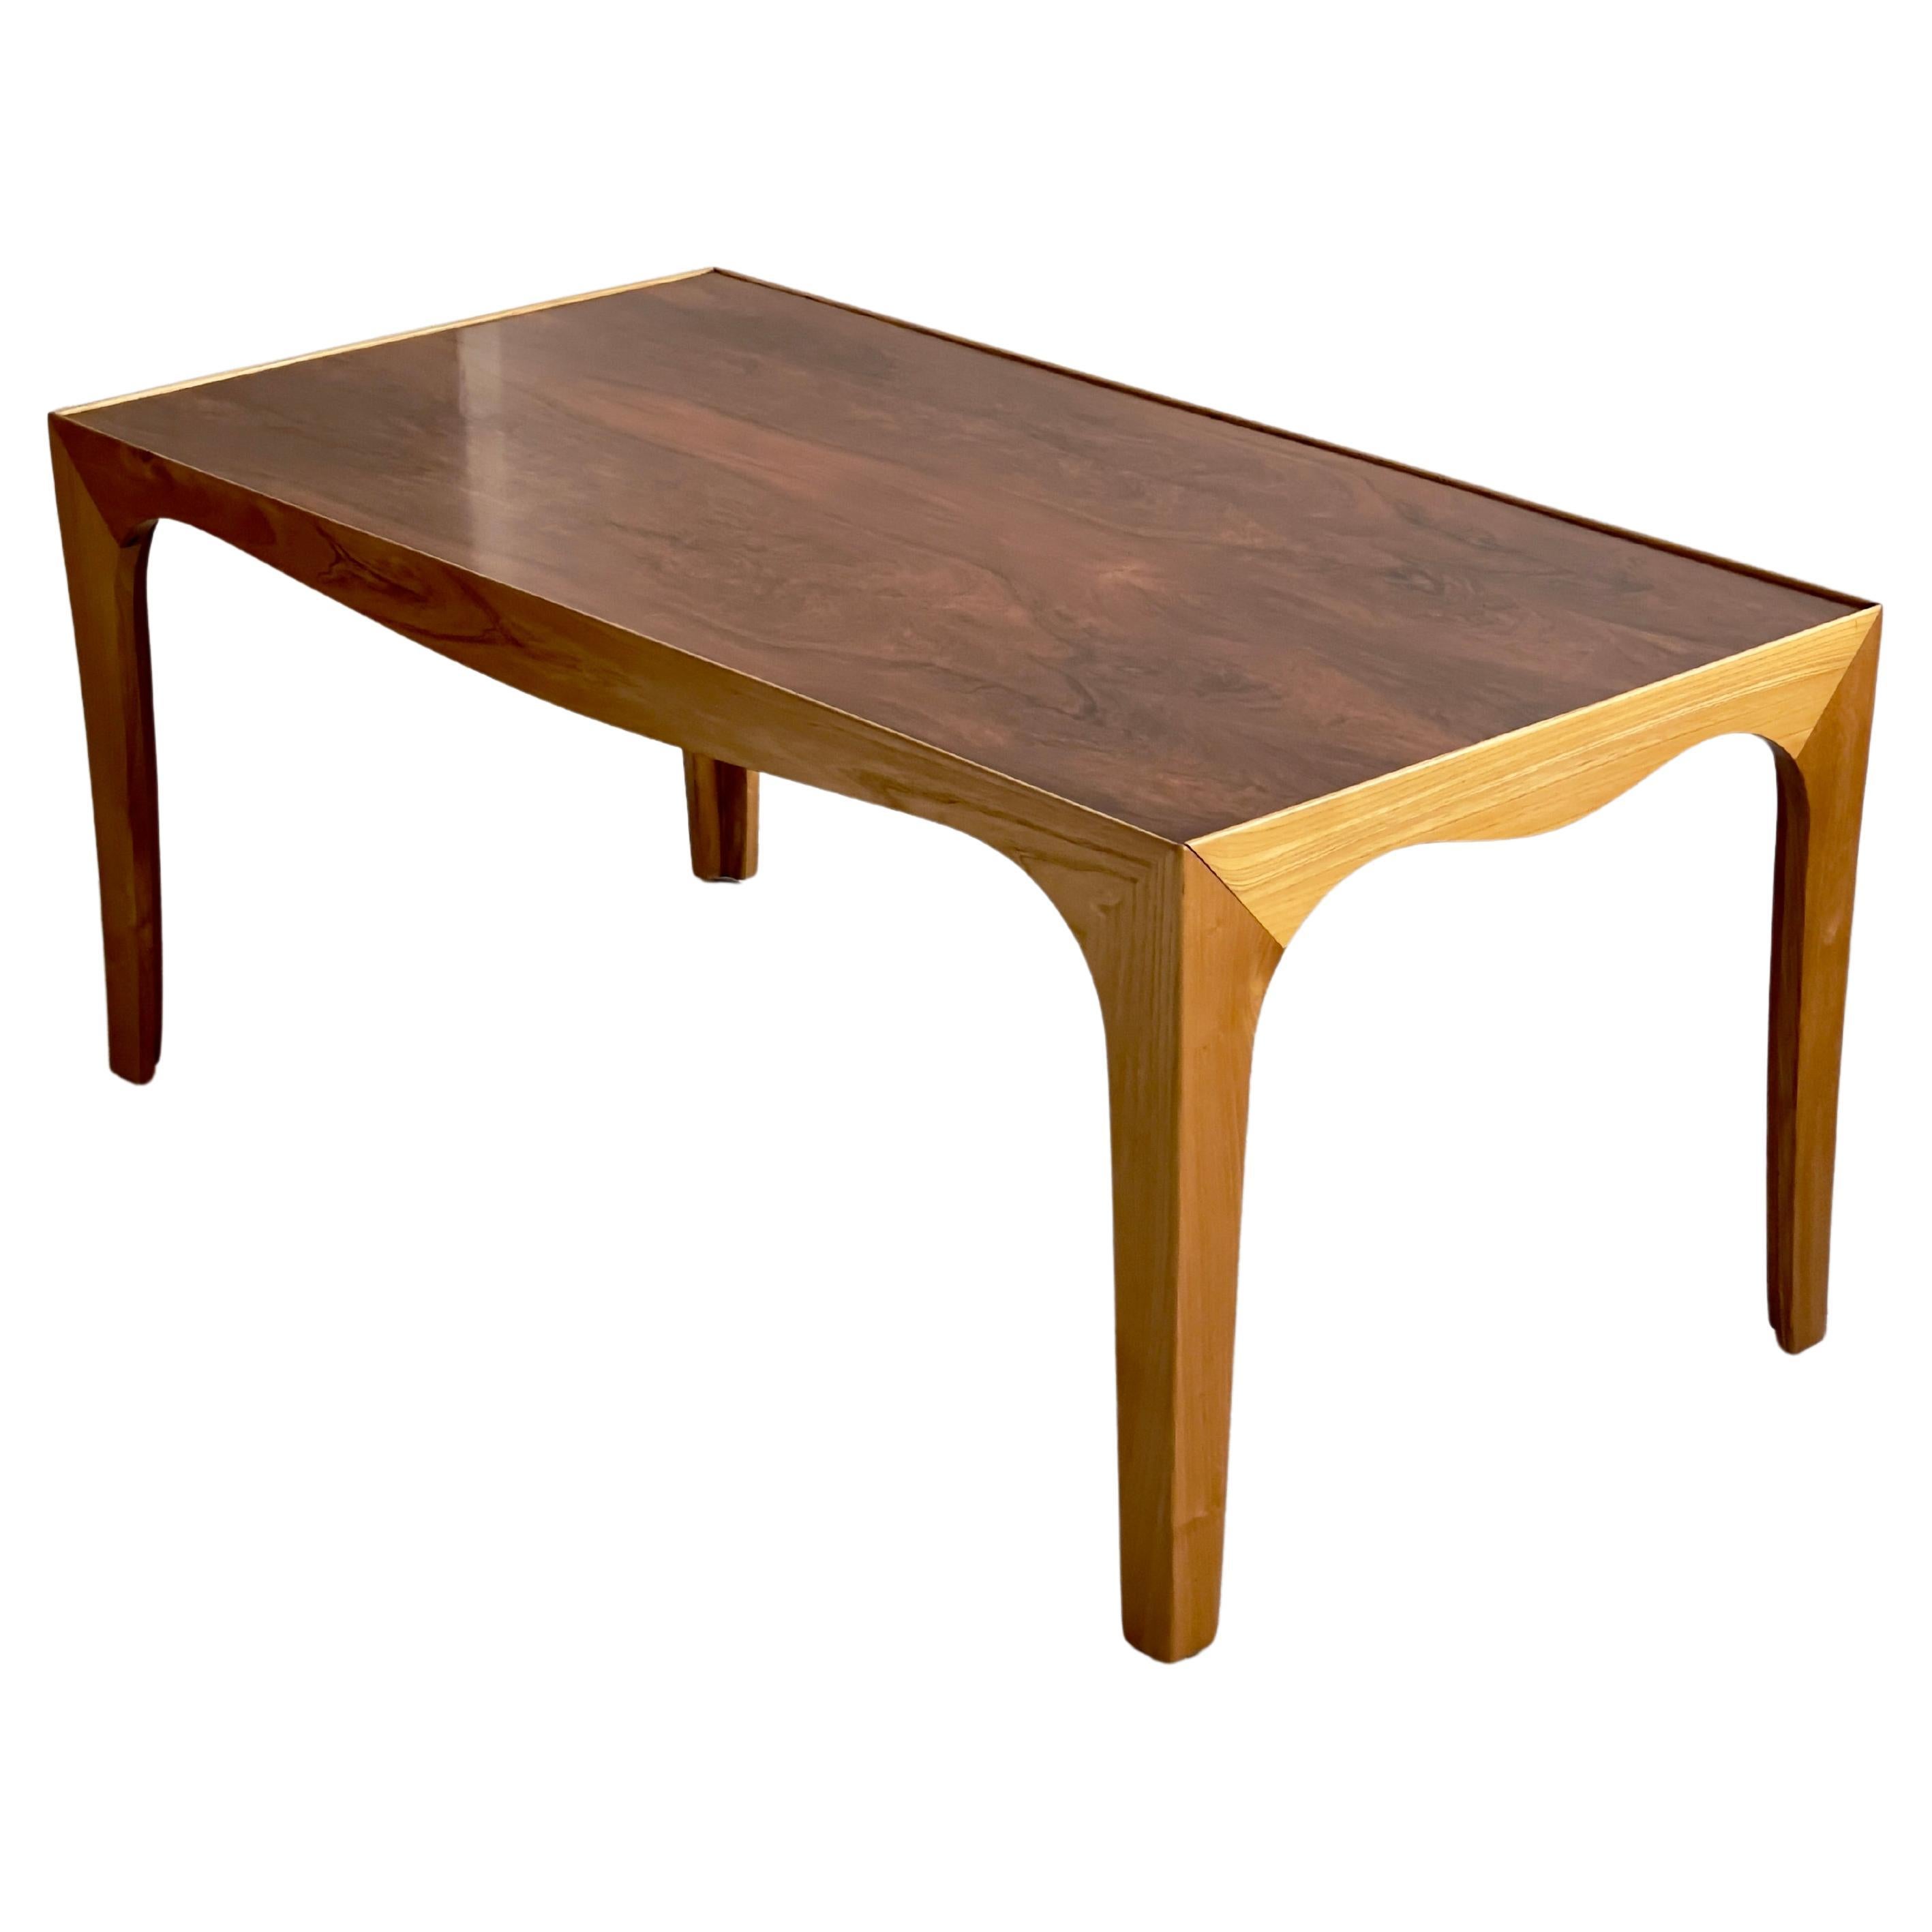 This elegant 1940s coffee table by Danish modern cabinet maker represents a remarkable fusion of craftsmanship, design, and materials characteristic of mid-20th-century Danish furniture.

The original surface finish is remarkably well-preserved,